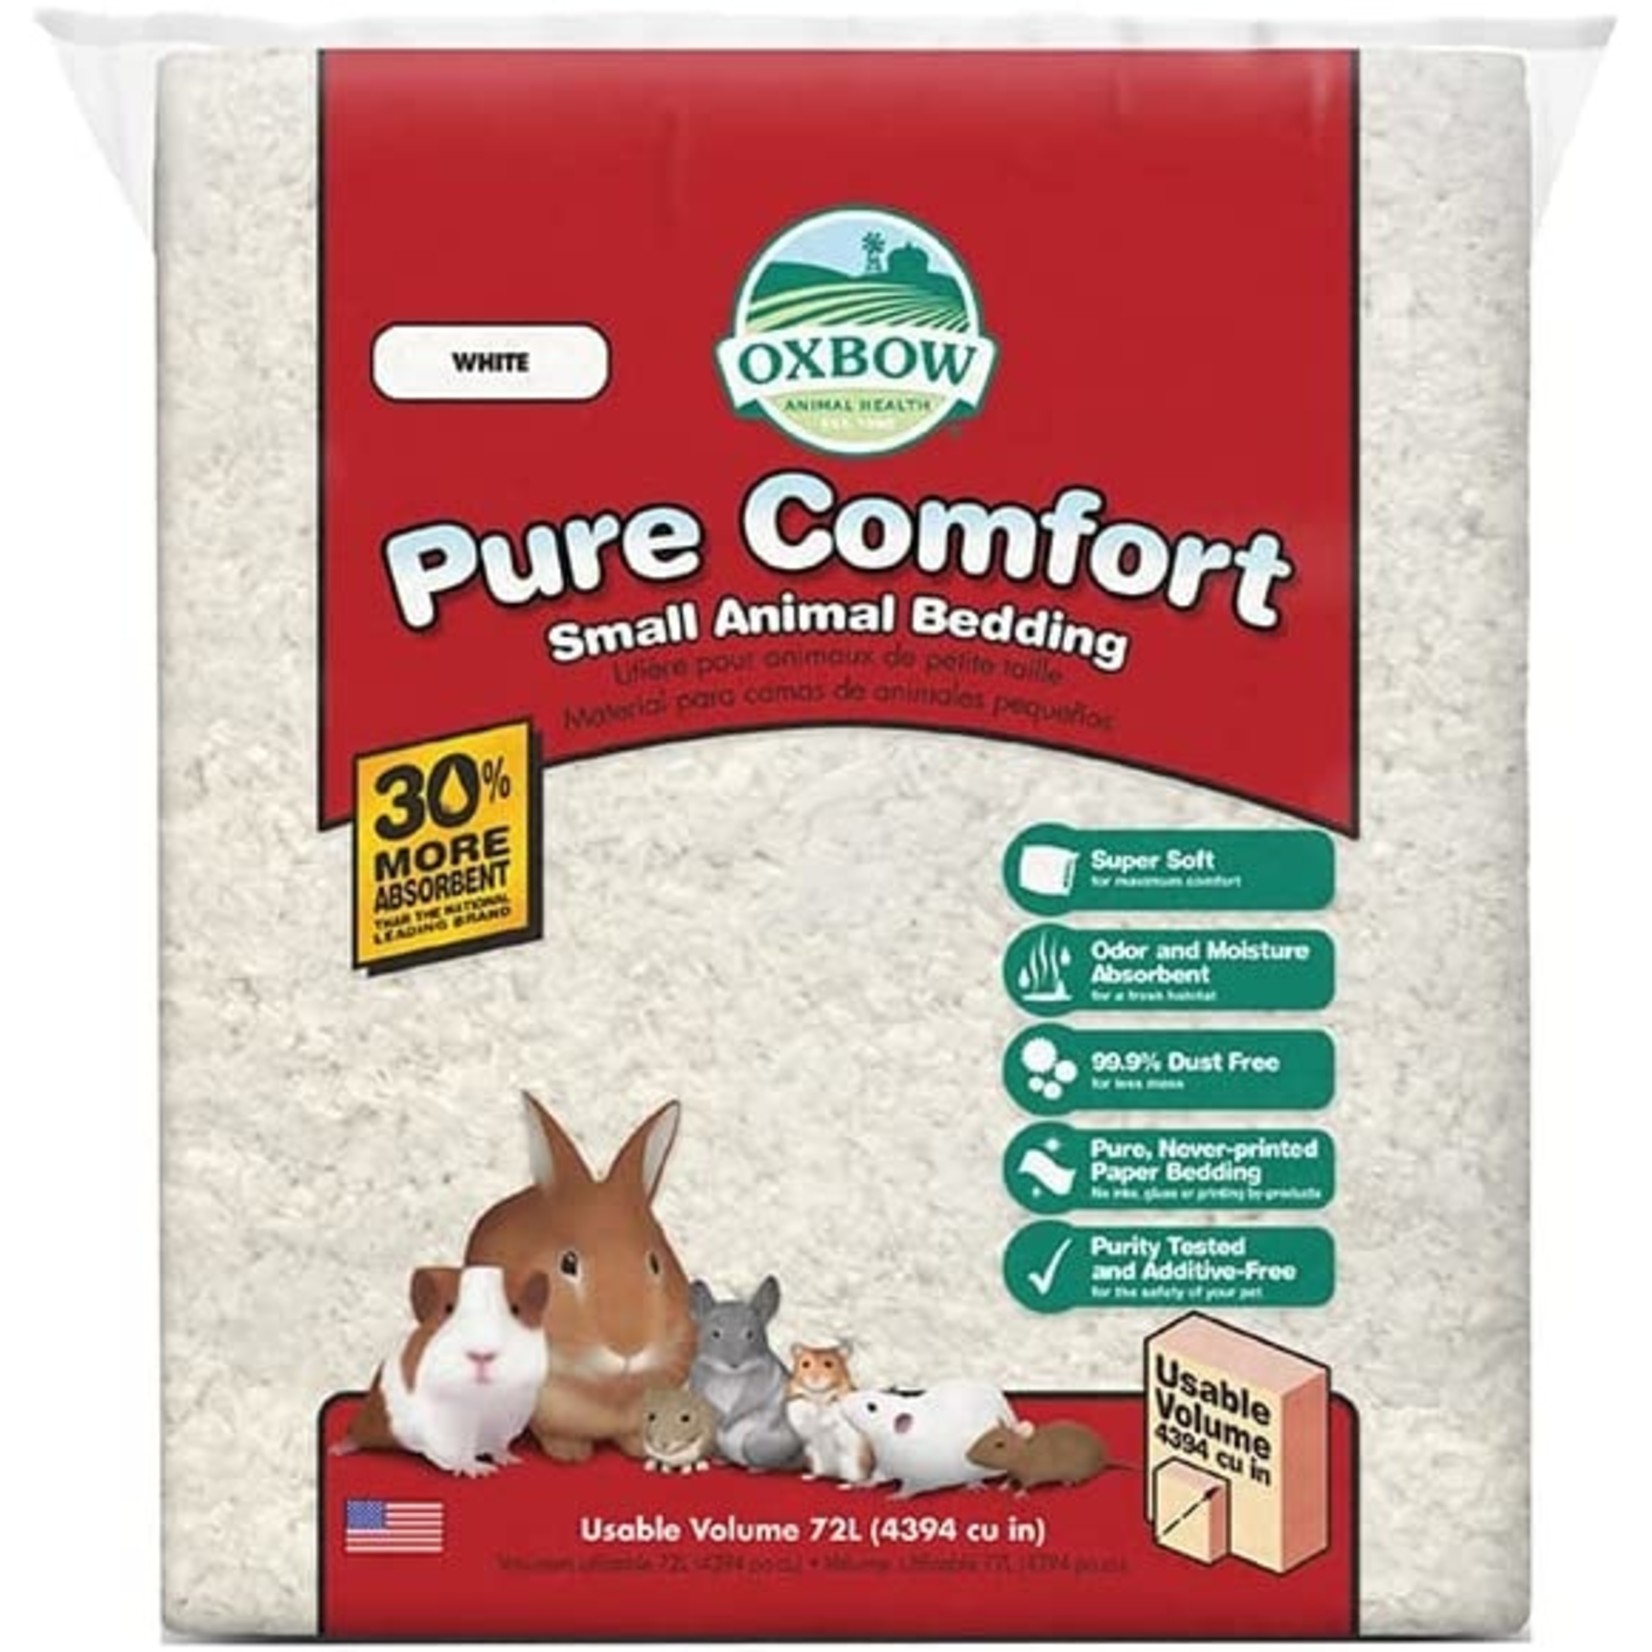 OXBOW OXBOW Pure Comfort Small Animal Bedding 72L